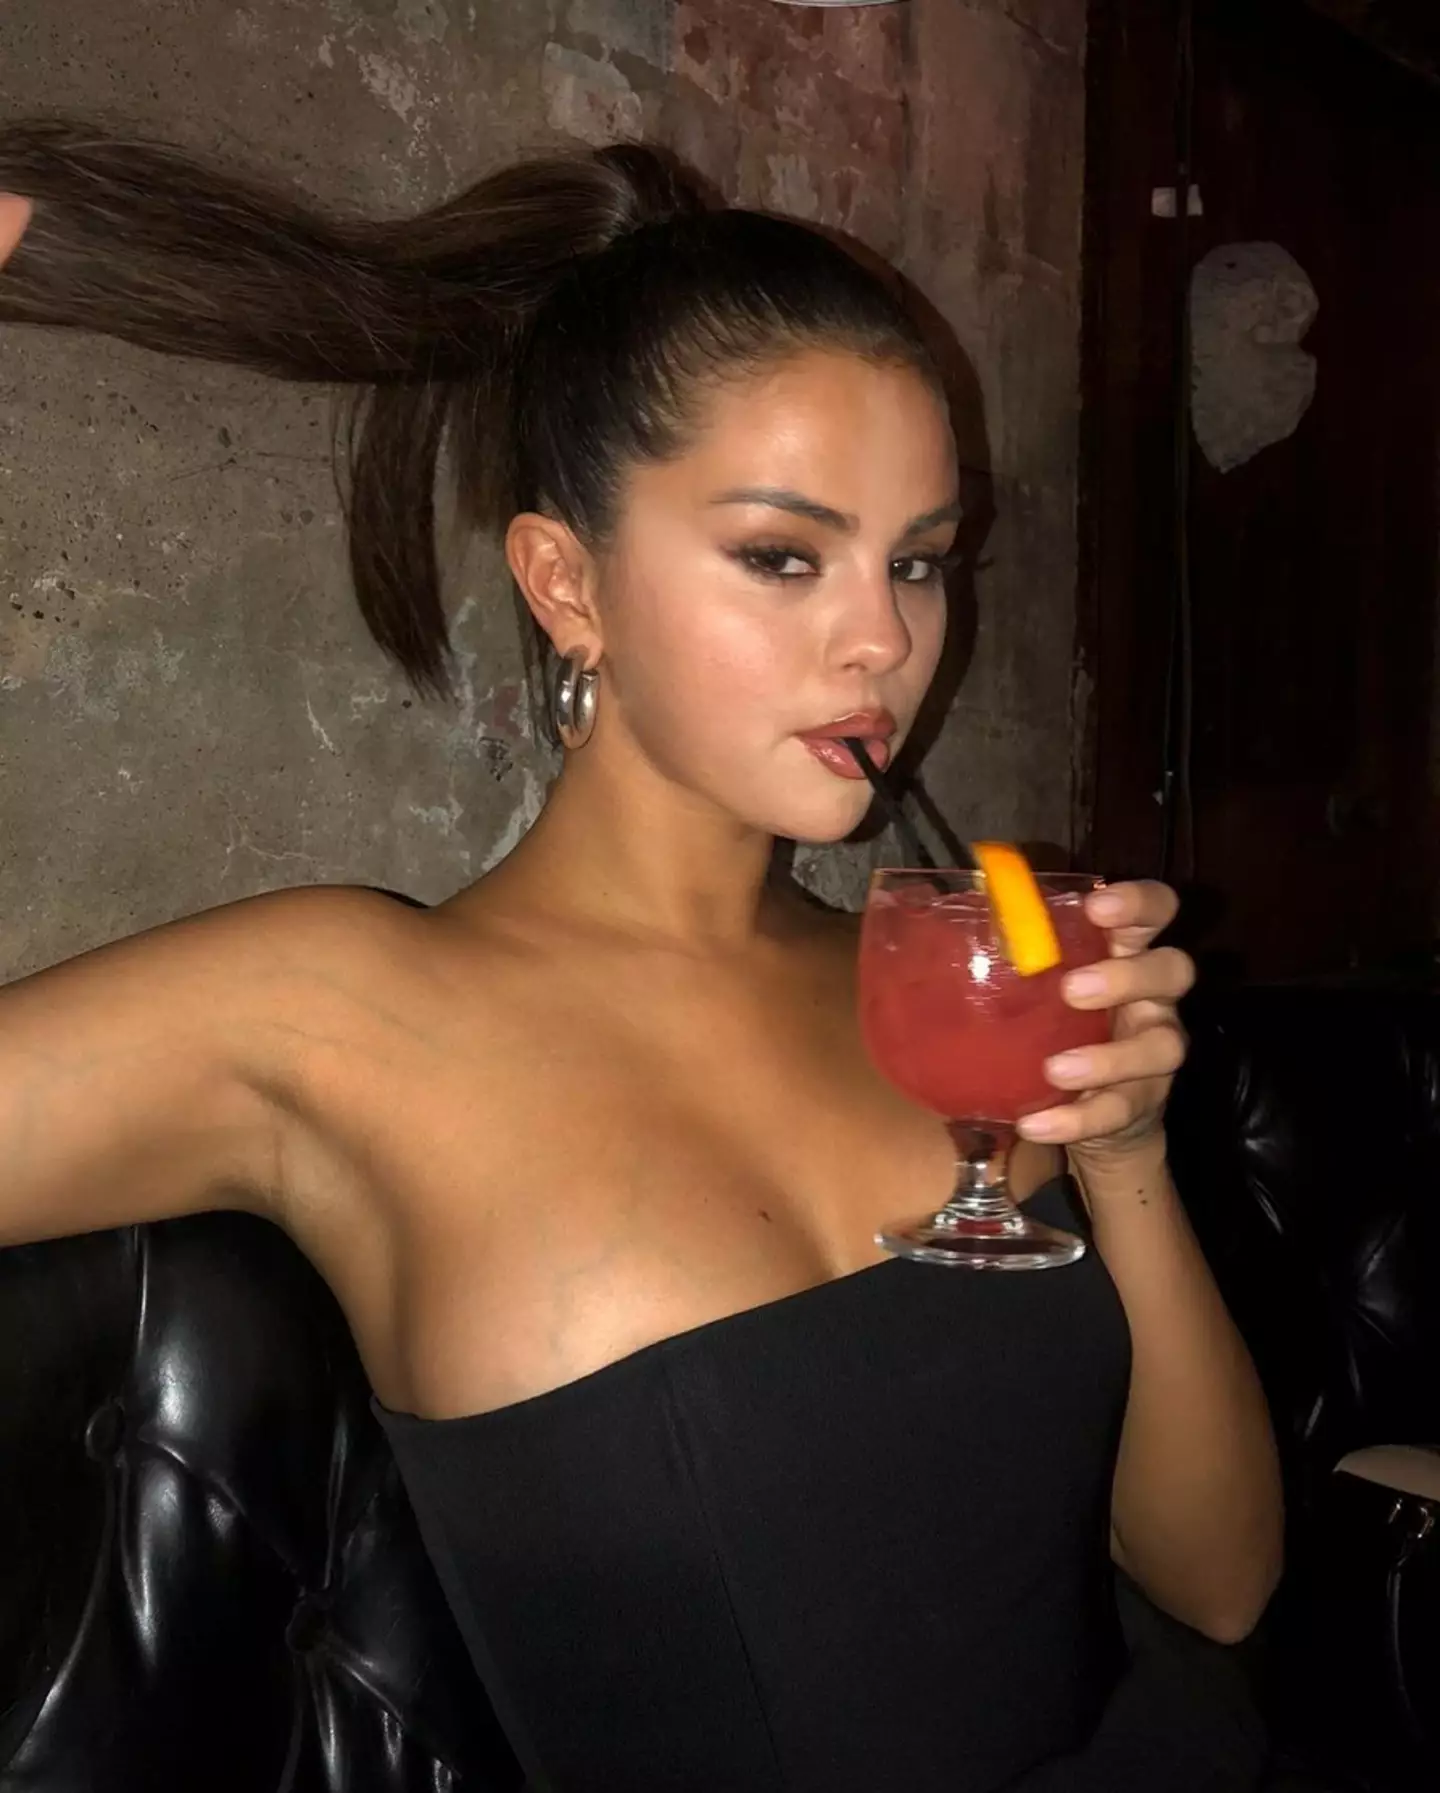 Selena was diagnosed with lupus in 2014.